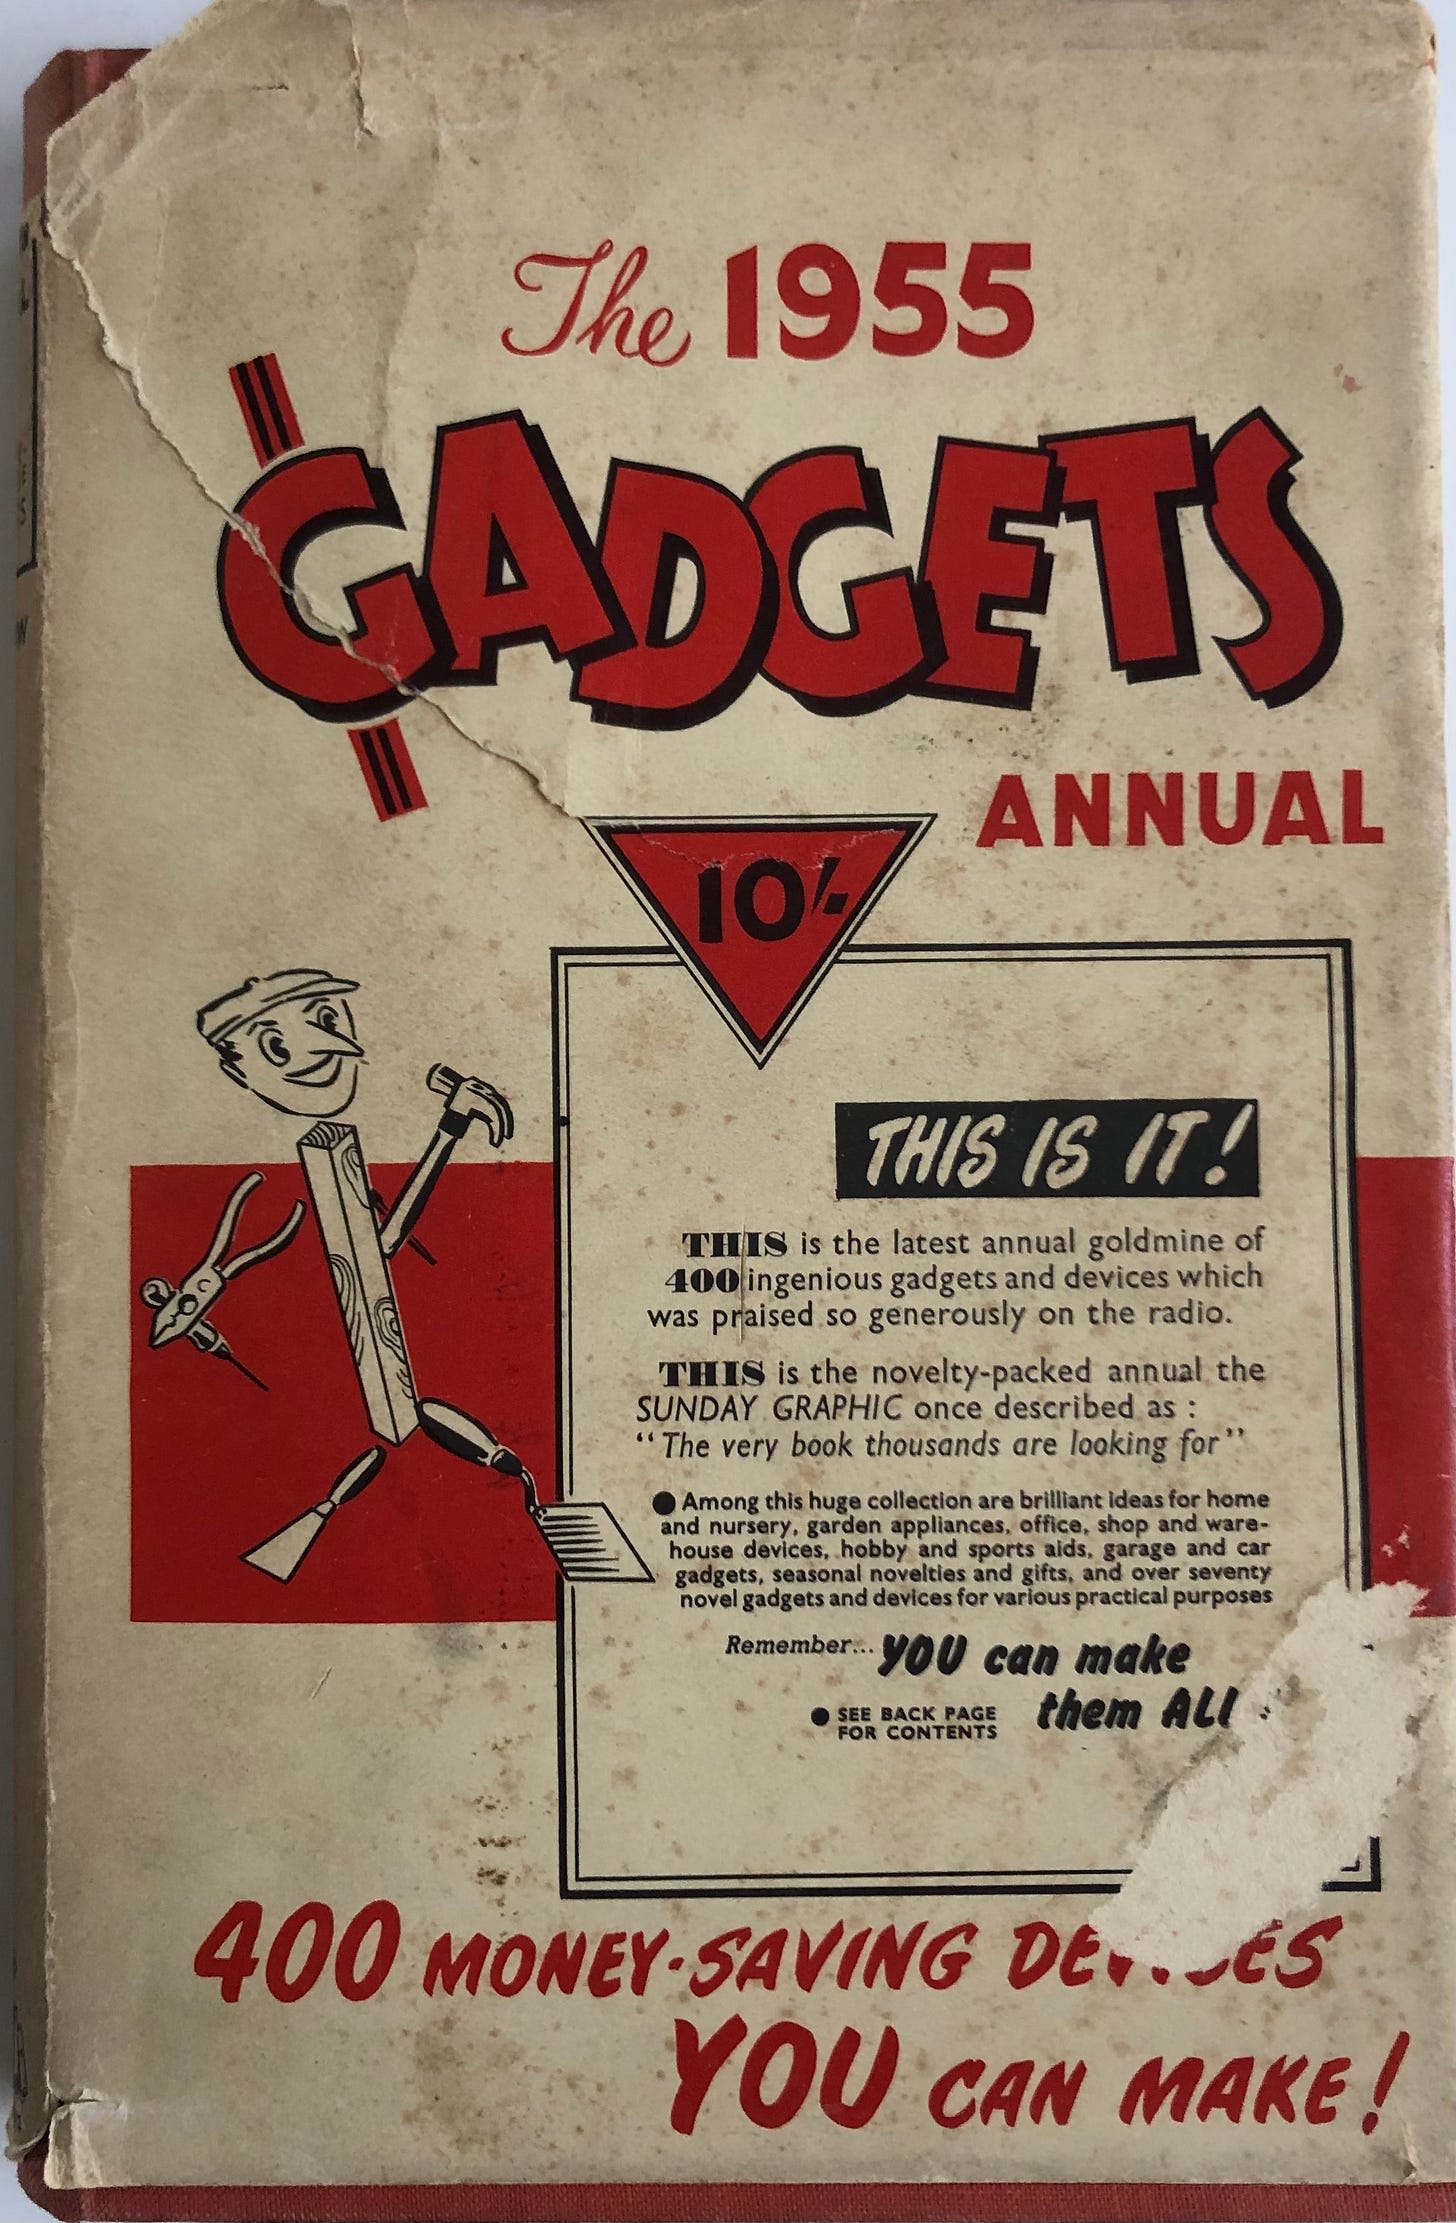 Very tatty looking cream coloured book, saying: The 1955 Gadgets Annual